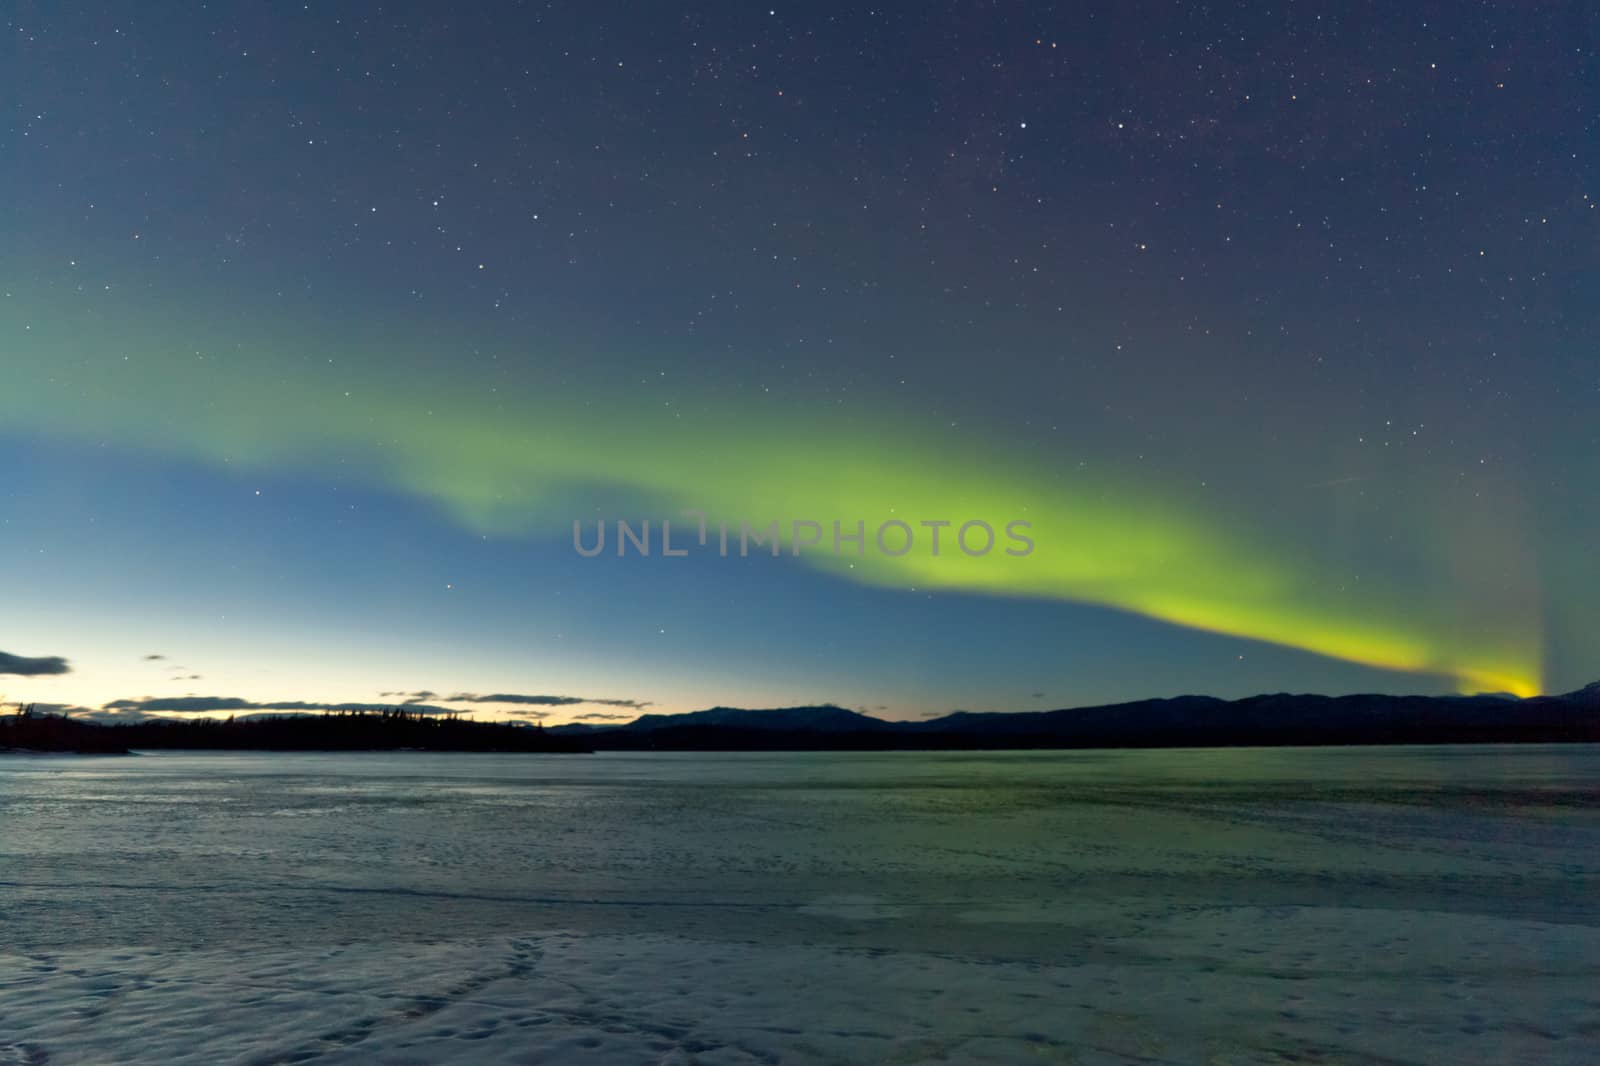 Intense Northern Lights or Aurora borealis or polar lights and morning dawn on night sky over icy landscape of frozen Lake Laberge, Yukon Territory, Canada